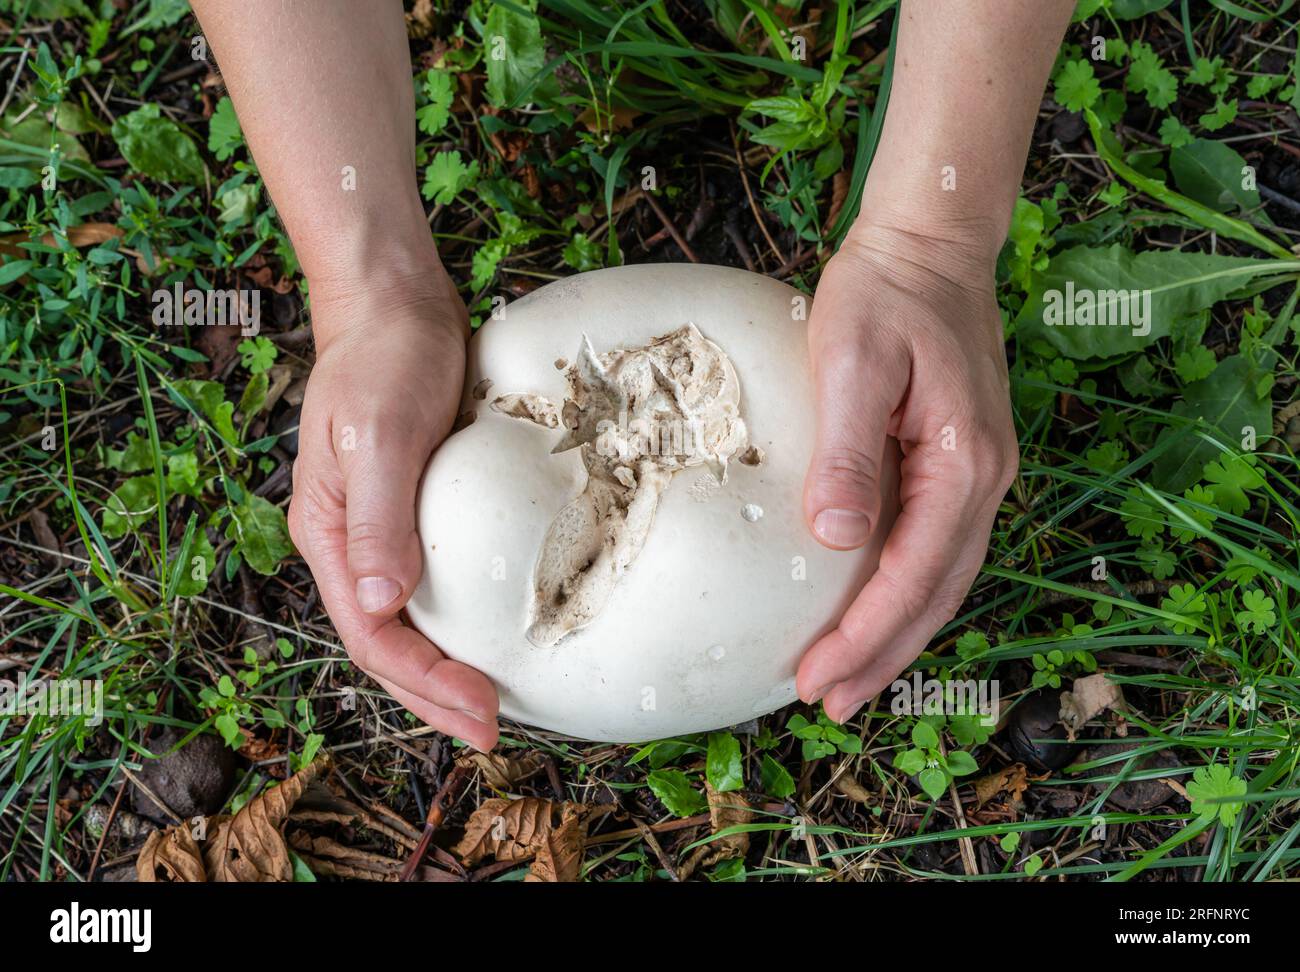 Calvatia gigantea, commonly known as the giant puffball mushroom, in hands Stock Photo